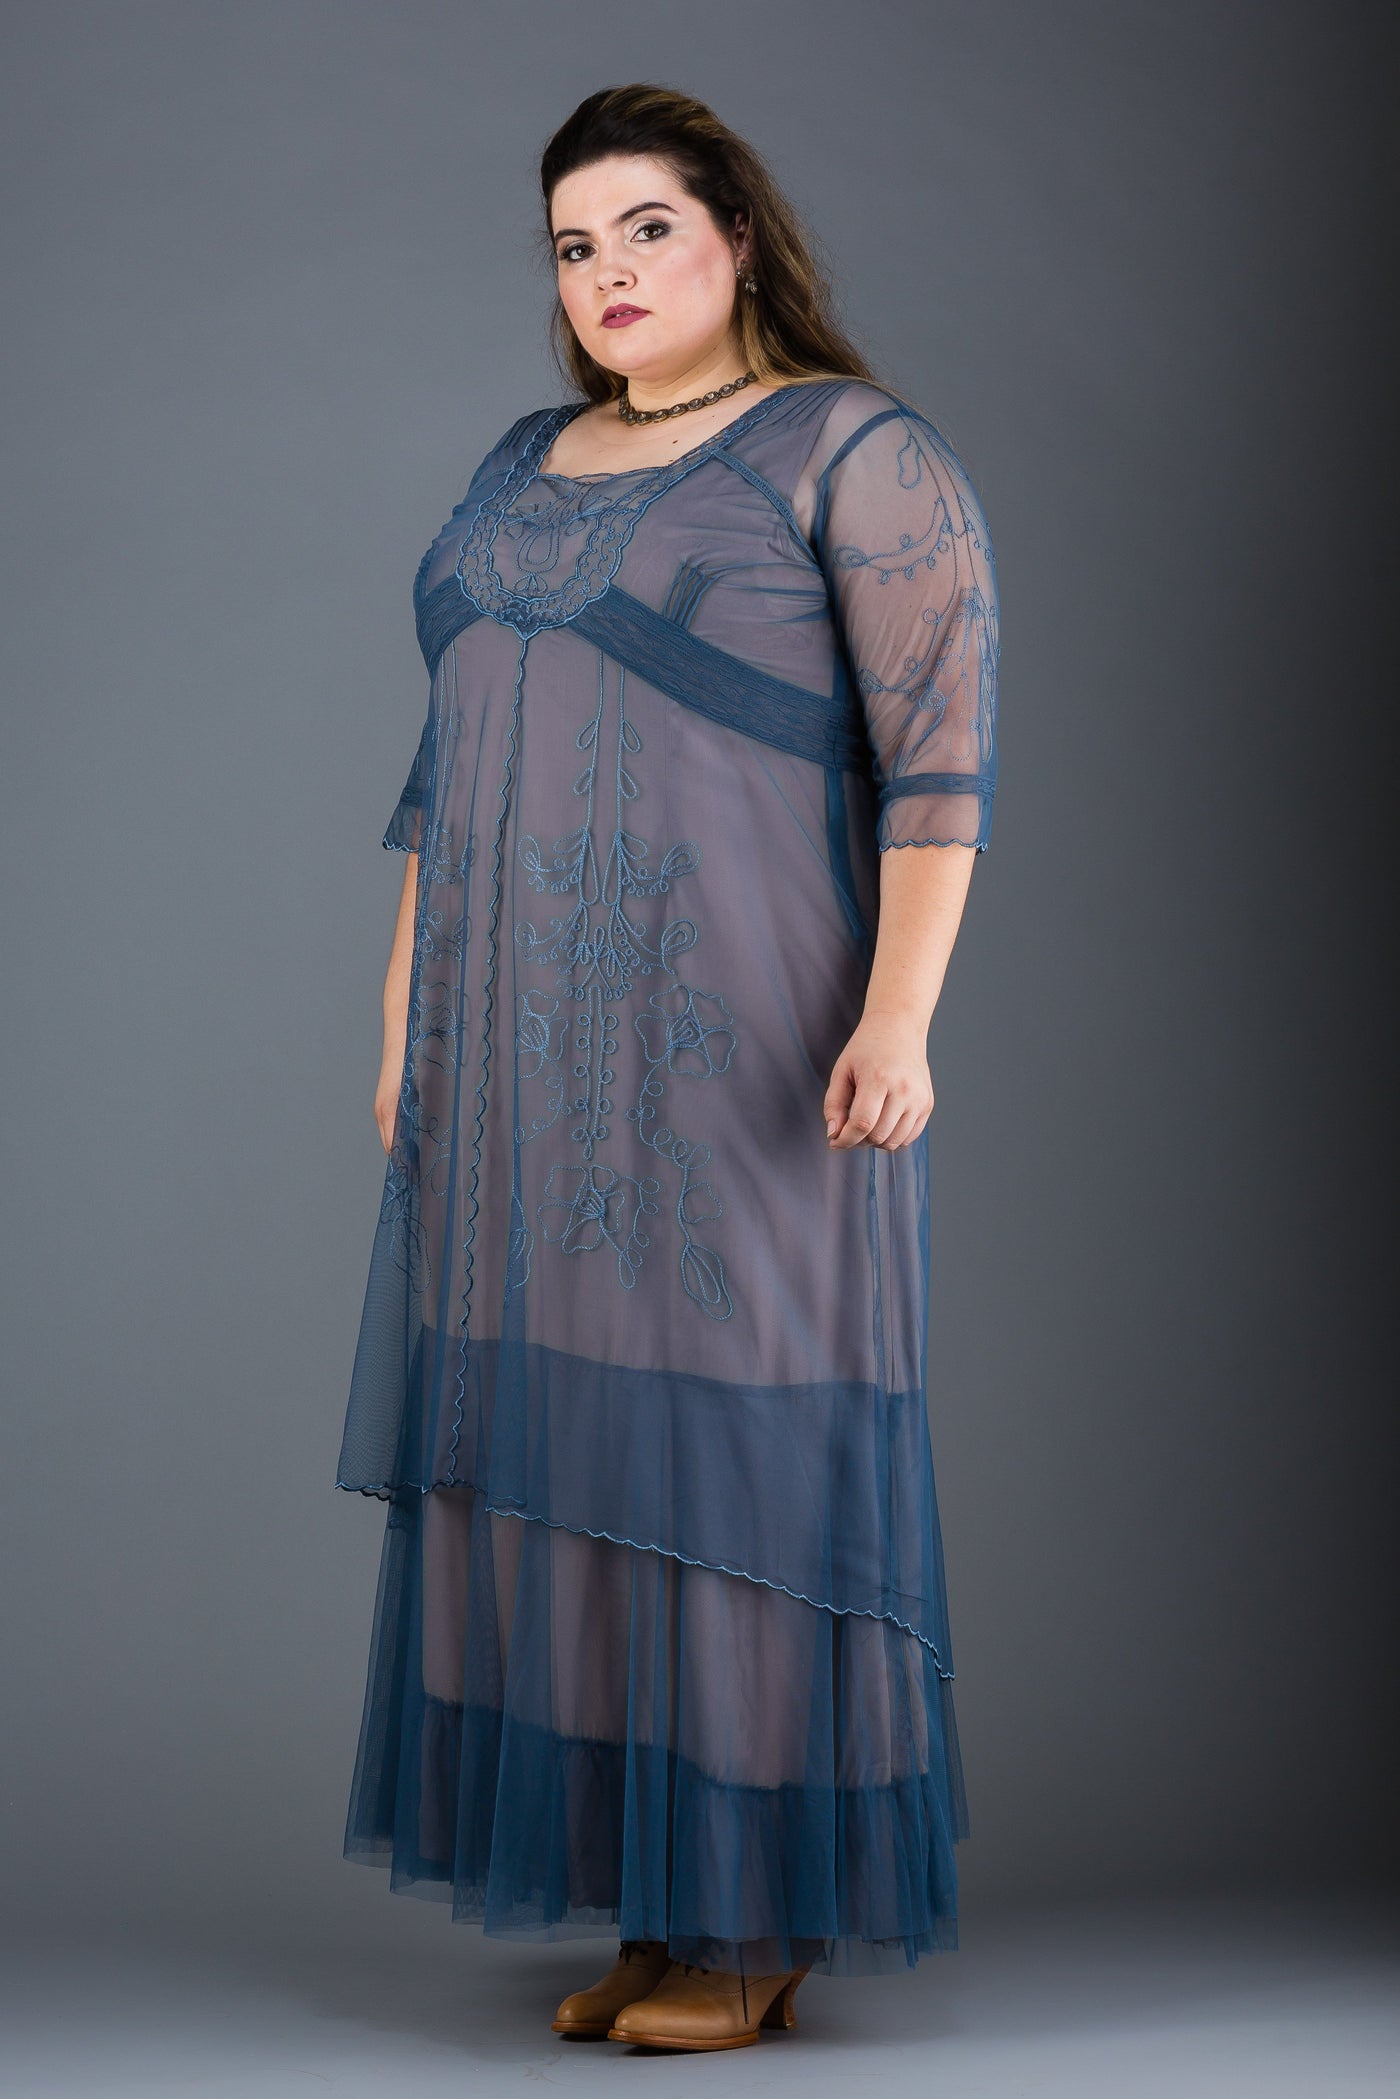 Plus Size Victoria Vintage Style Party Gown in Azure by Nataya